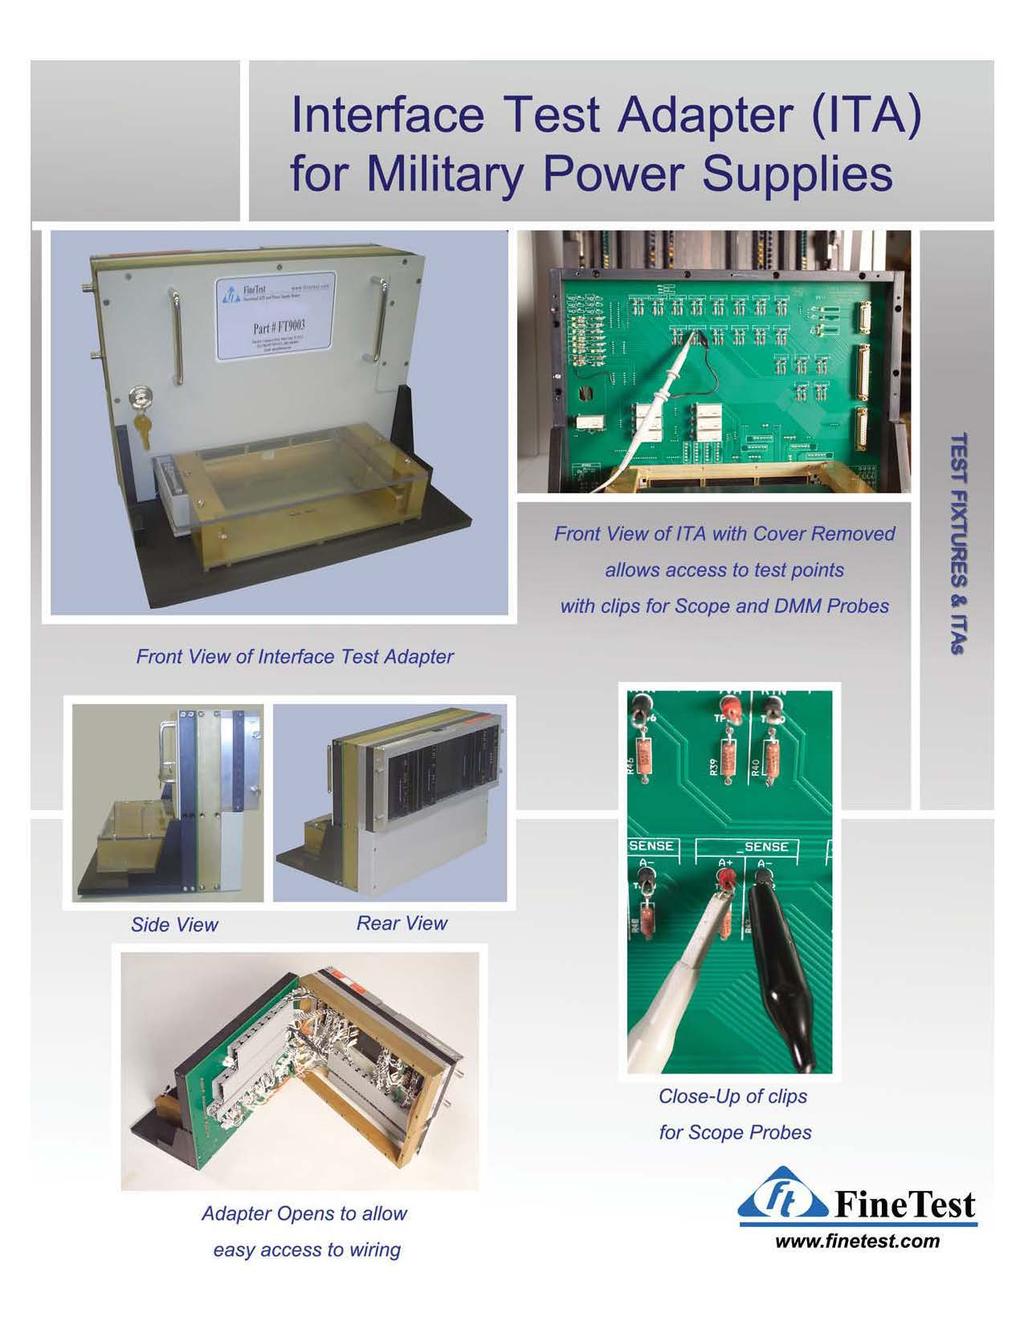 Interface Test Adapter (ITA) for Military Power Supplies Front View of IT A with Cover Removed allows access to test points with clips for Scope and DMM